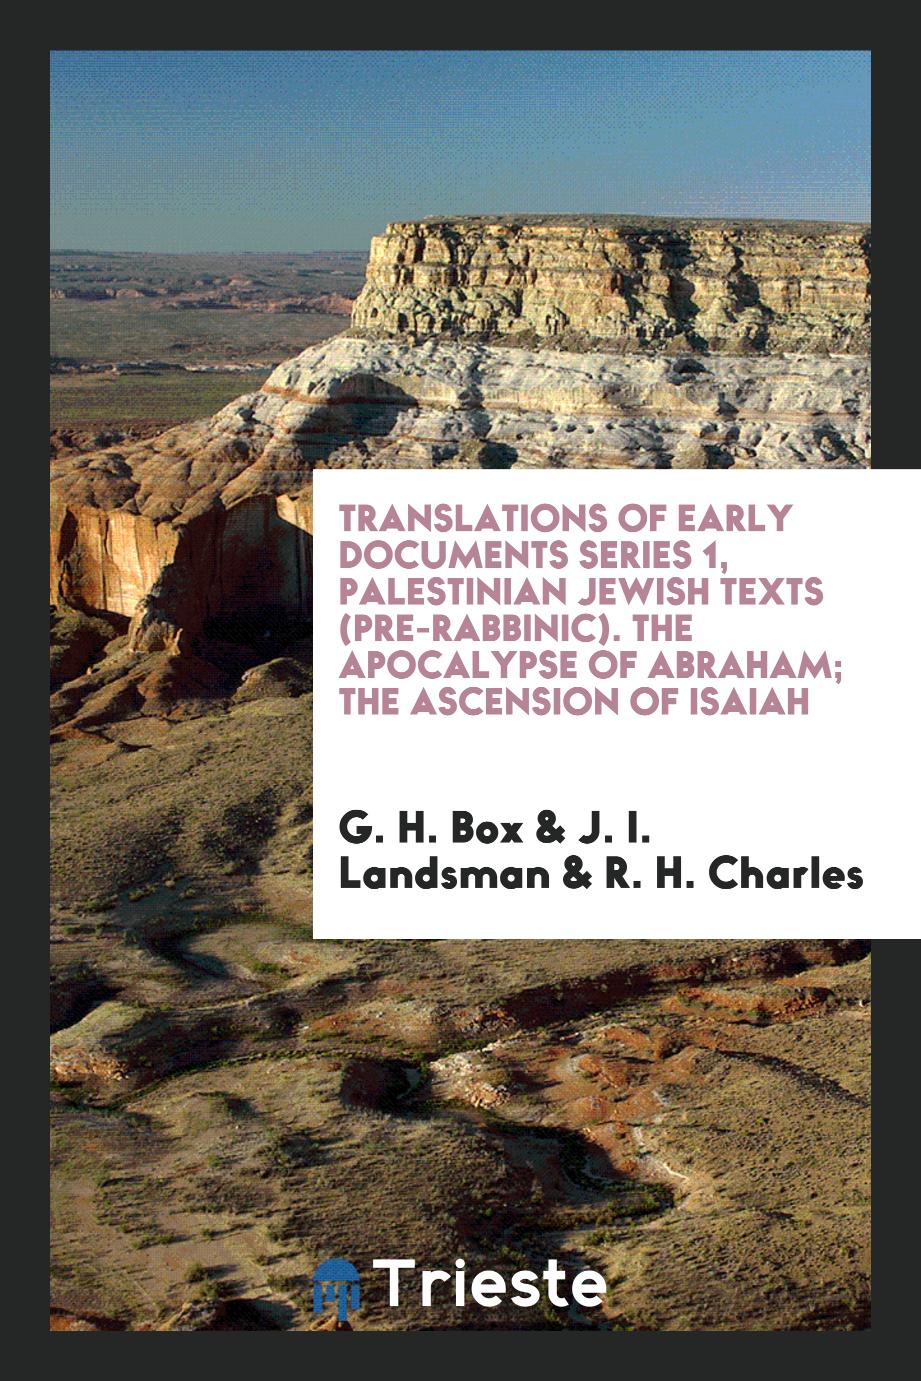 Translations of early documents series 1, Palestinian Jewish texts (pre-rabbinic). The Apocalypse of Abraham; The Ascension of Isaiah